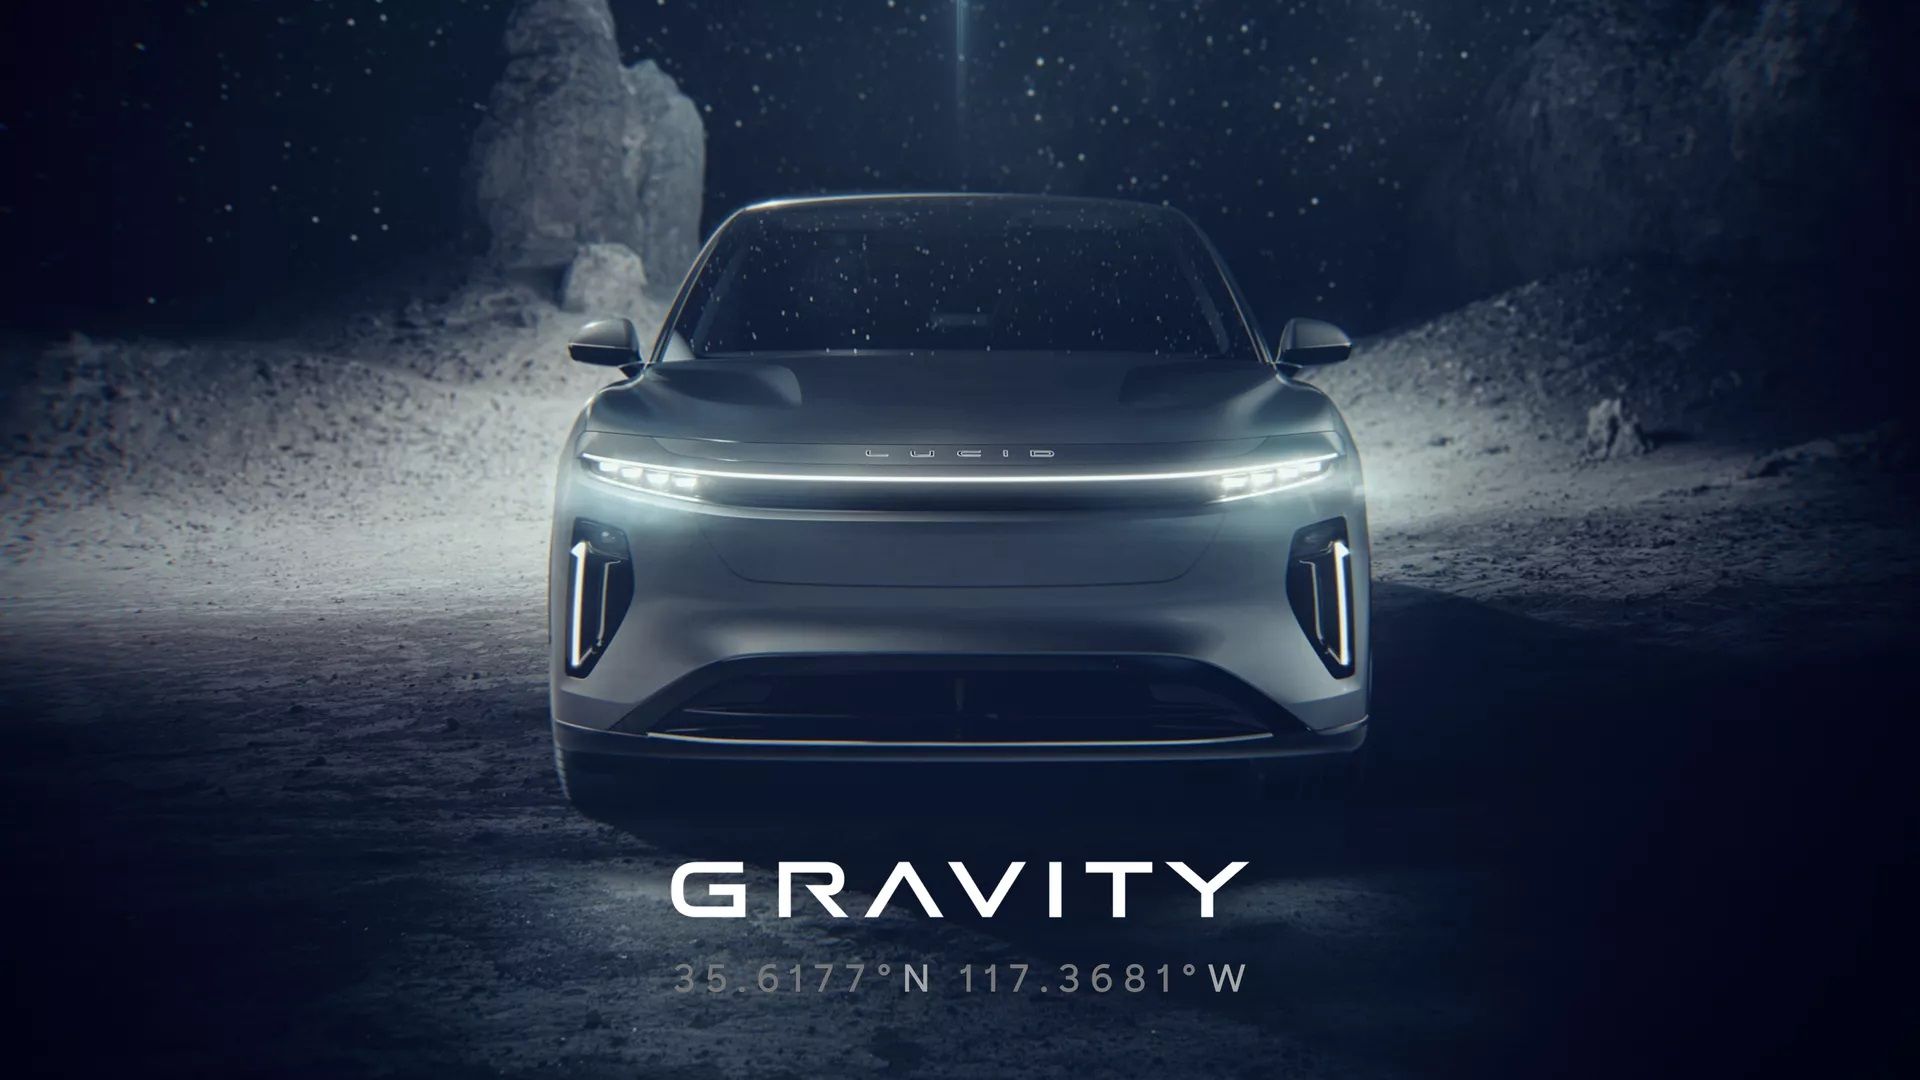 The Lucid Air Gravity Could Be The World's First True Electric Super SUV